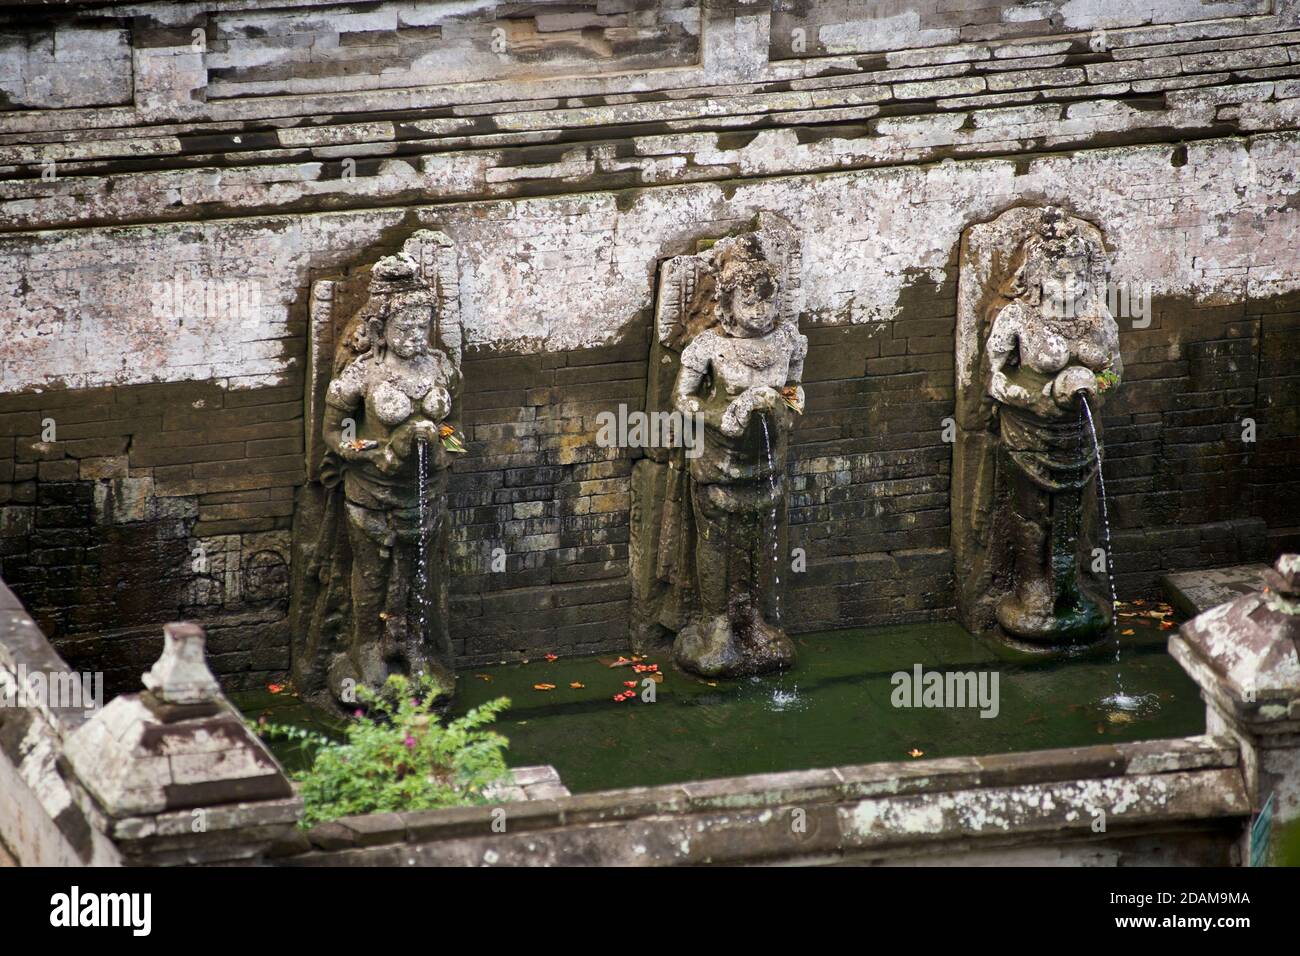 Stone carvings at the Bathing place, Goa Gajah, Bali, Indonesia, Southeast Asia Stock Photo